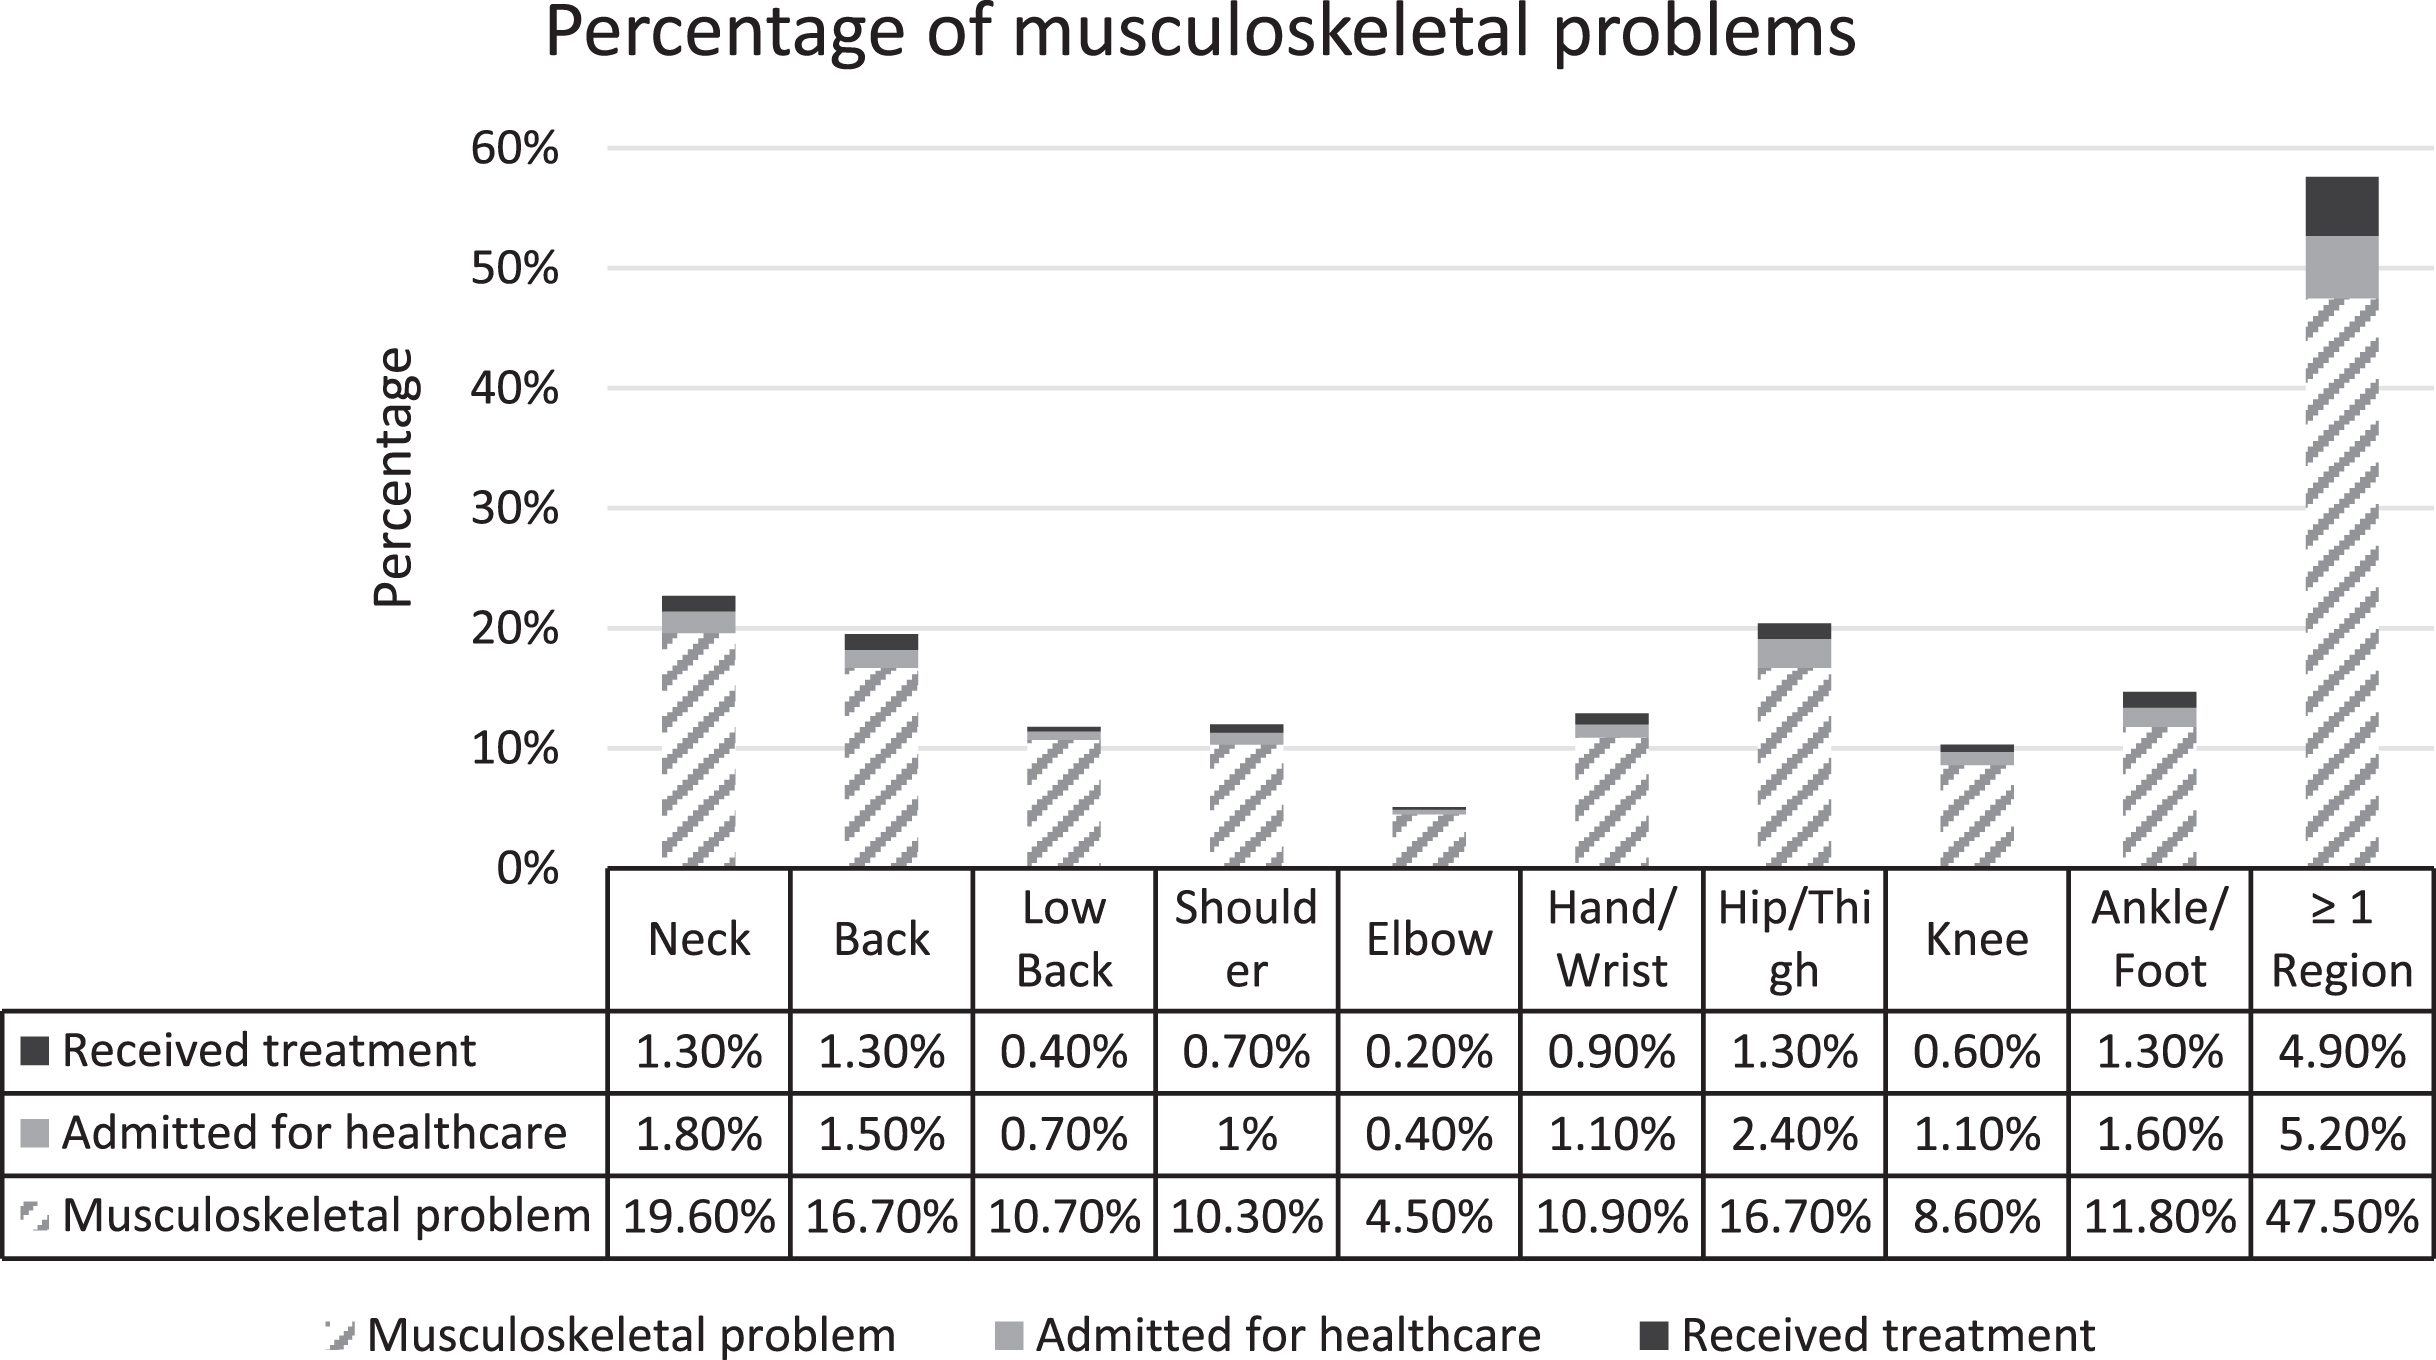 Prevalence of musculoskeletal problems in the last month.